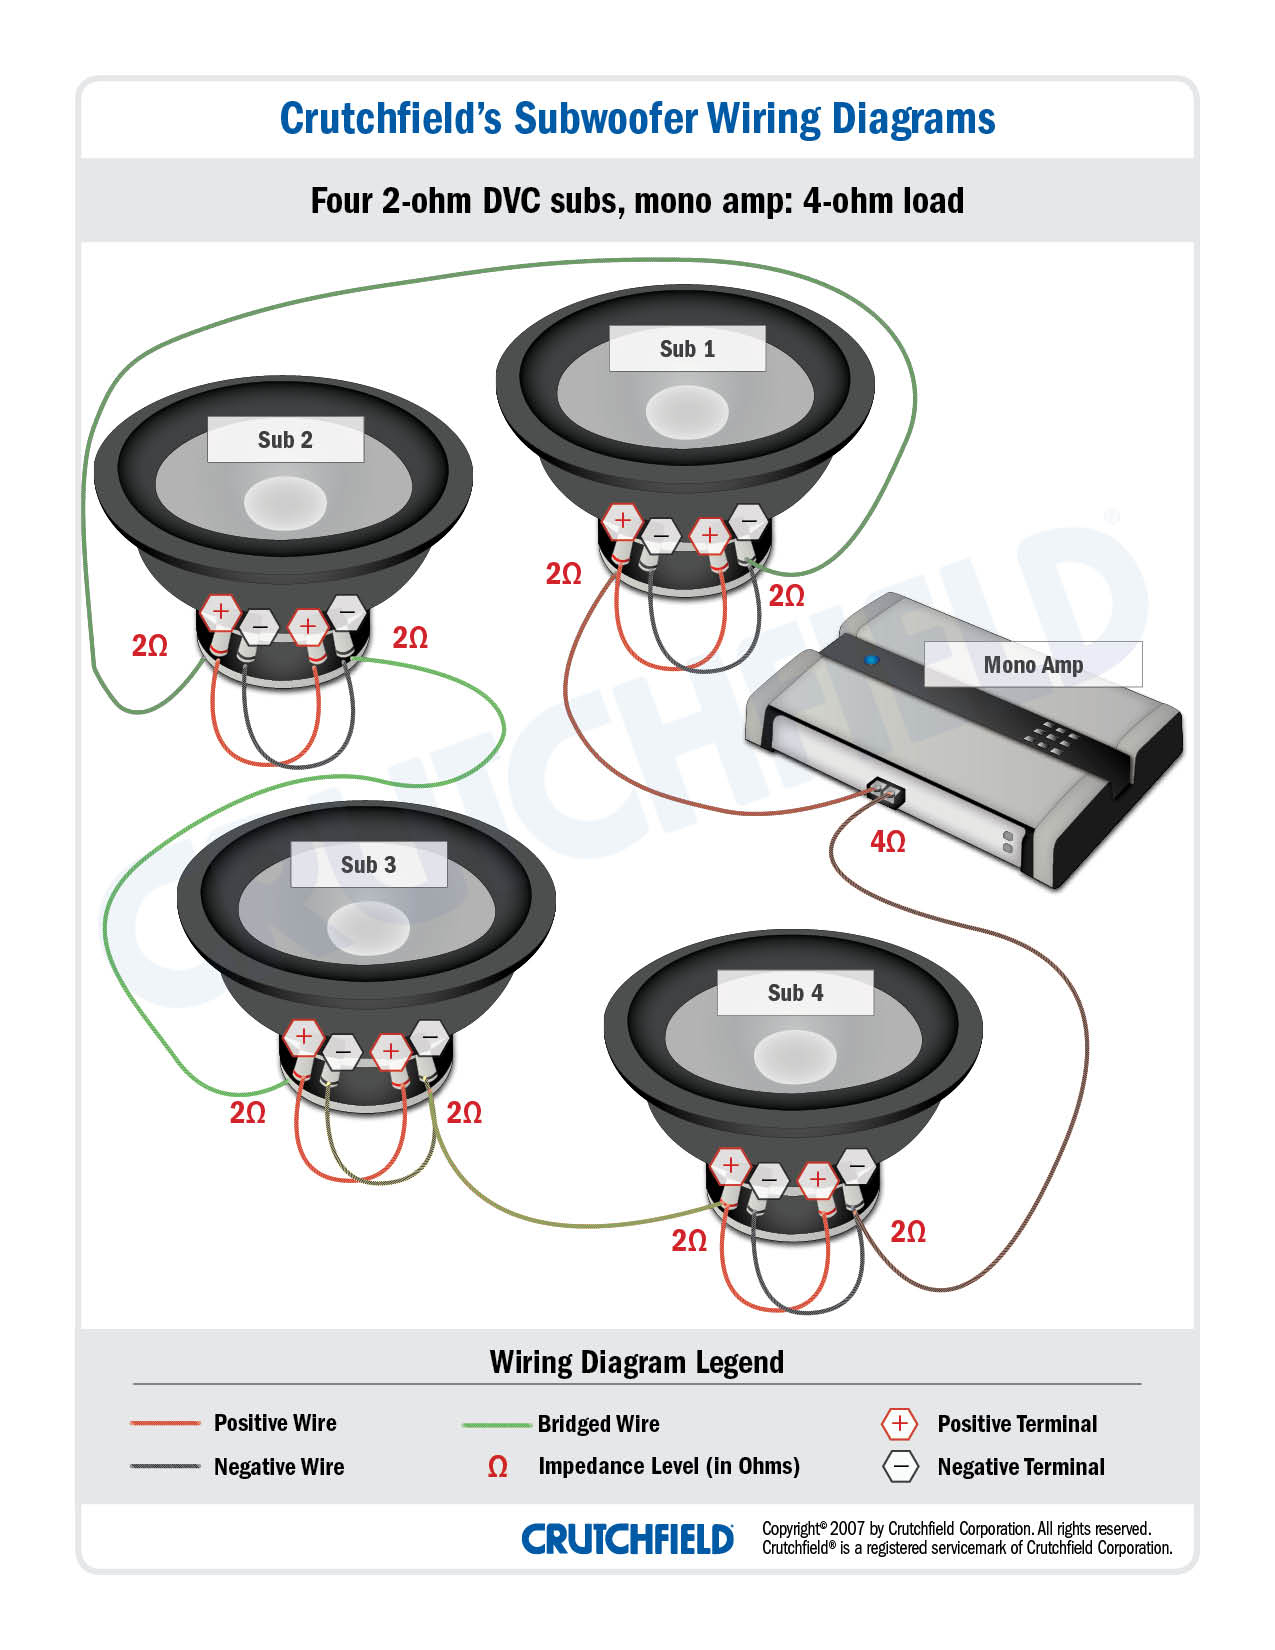 Subwoofer Wiring Diagrams — How To Wire Your Subs - Subwoofer Wiring Diagram